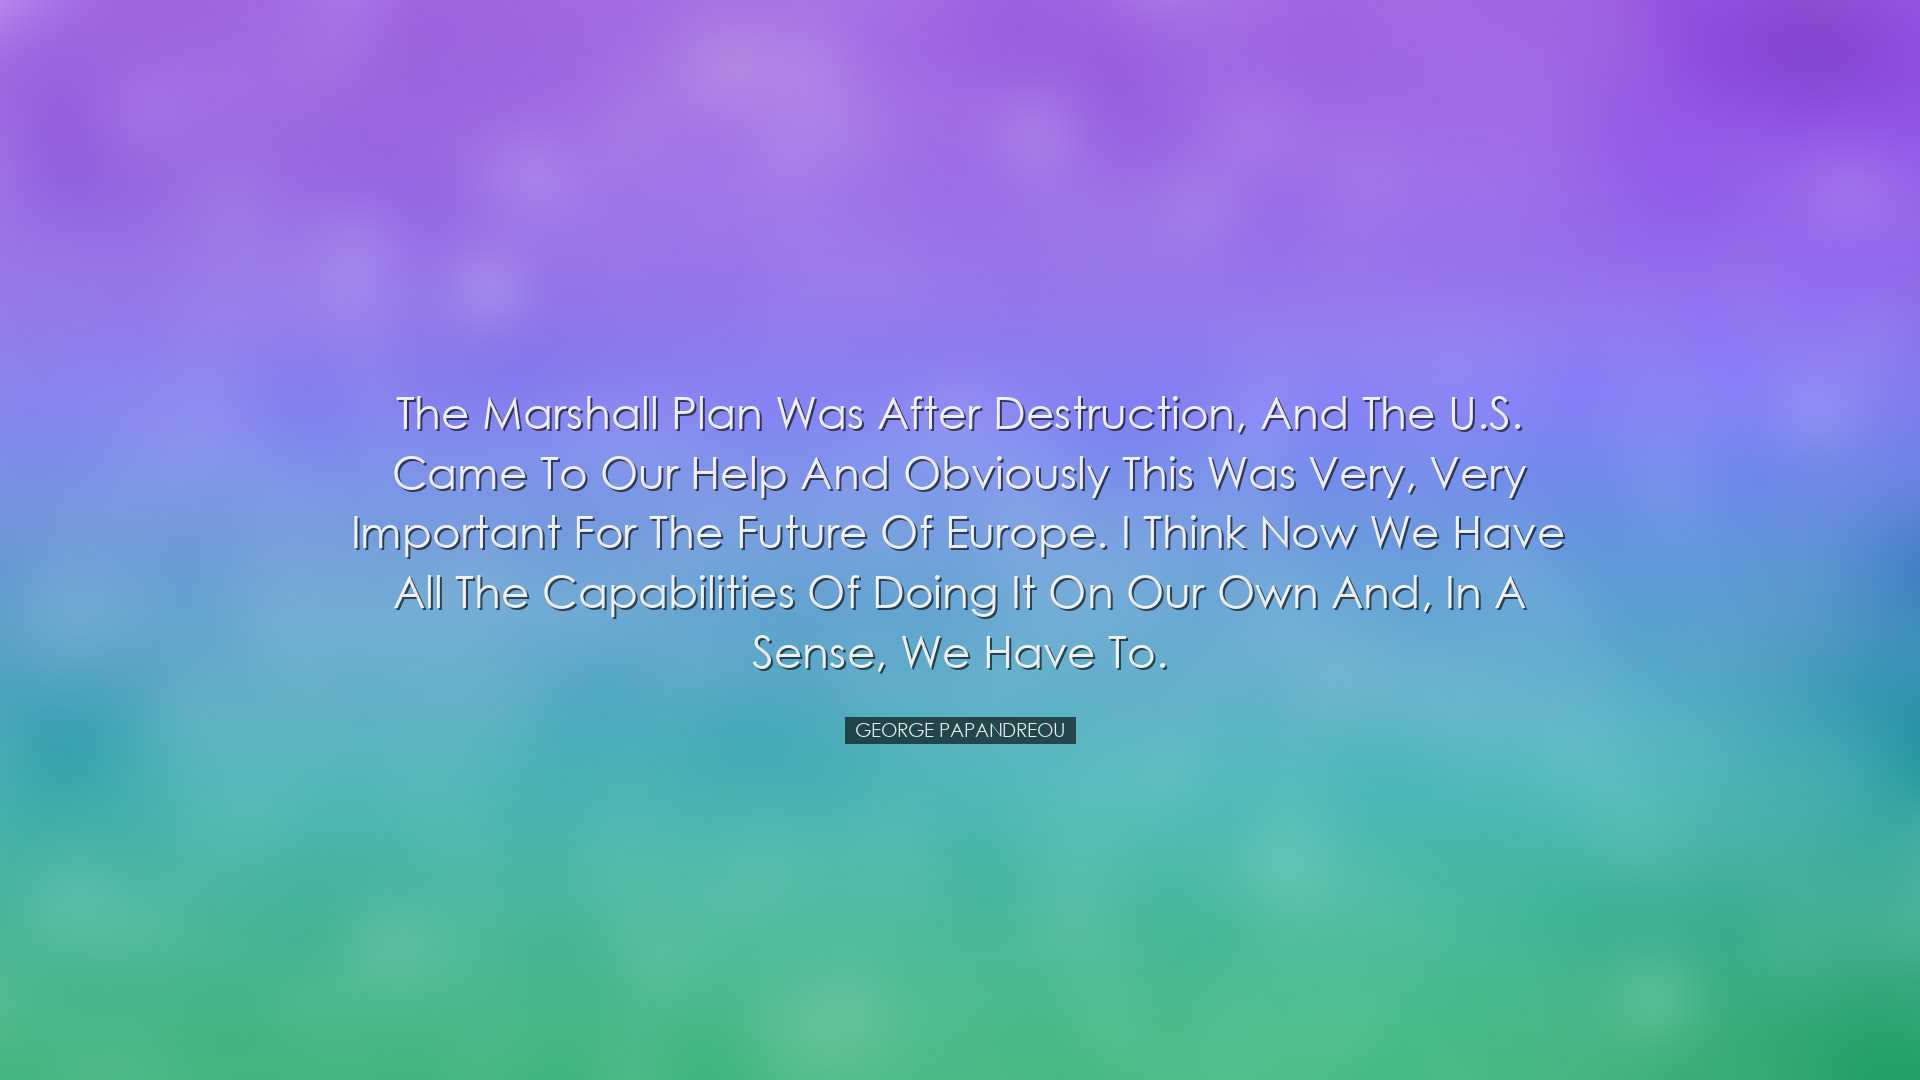 The Marshall Plan was after destruction, and the U.S. came to our